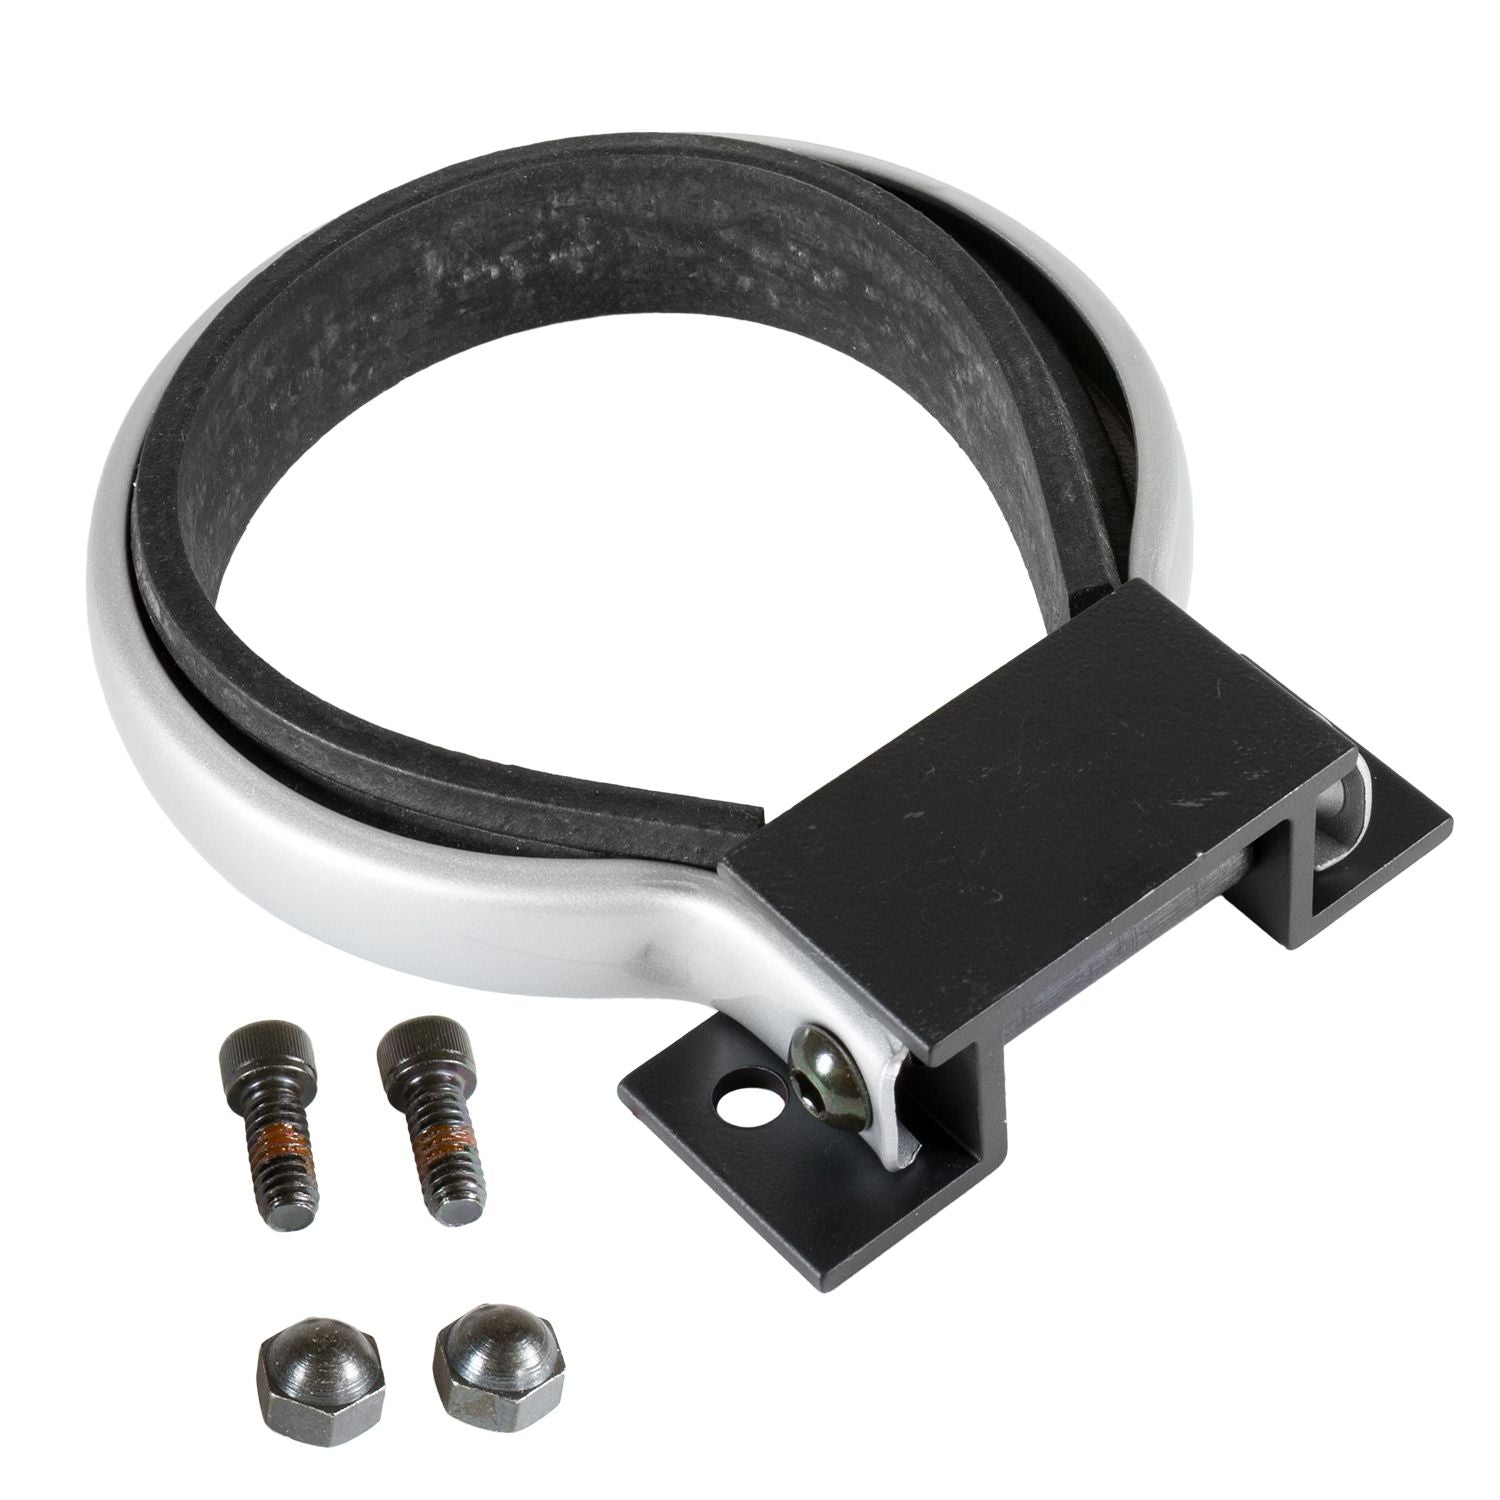 AutoMeter Pro-Cycle Tachometer Mount Shock Strap Kit For 3 3/4in & 5in Tach (3 3/4in Speedo) - Dirty Racing Products